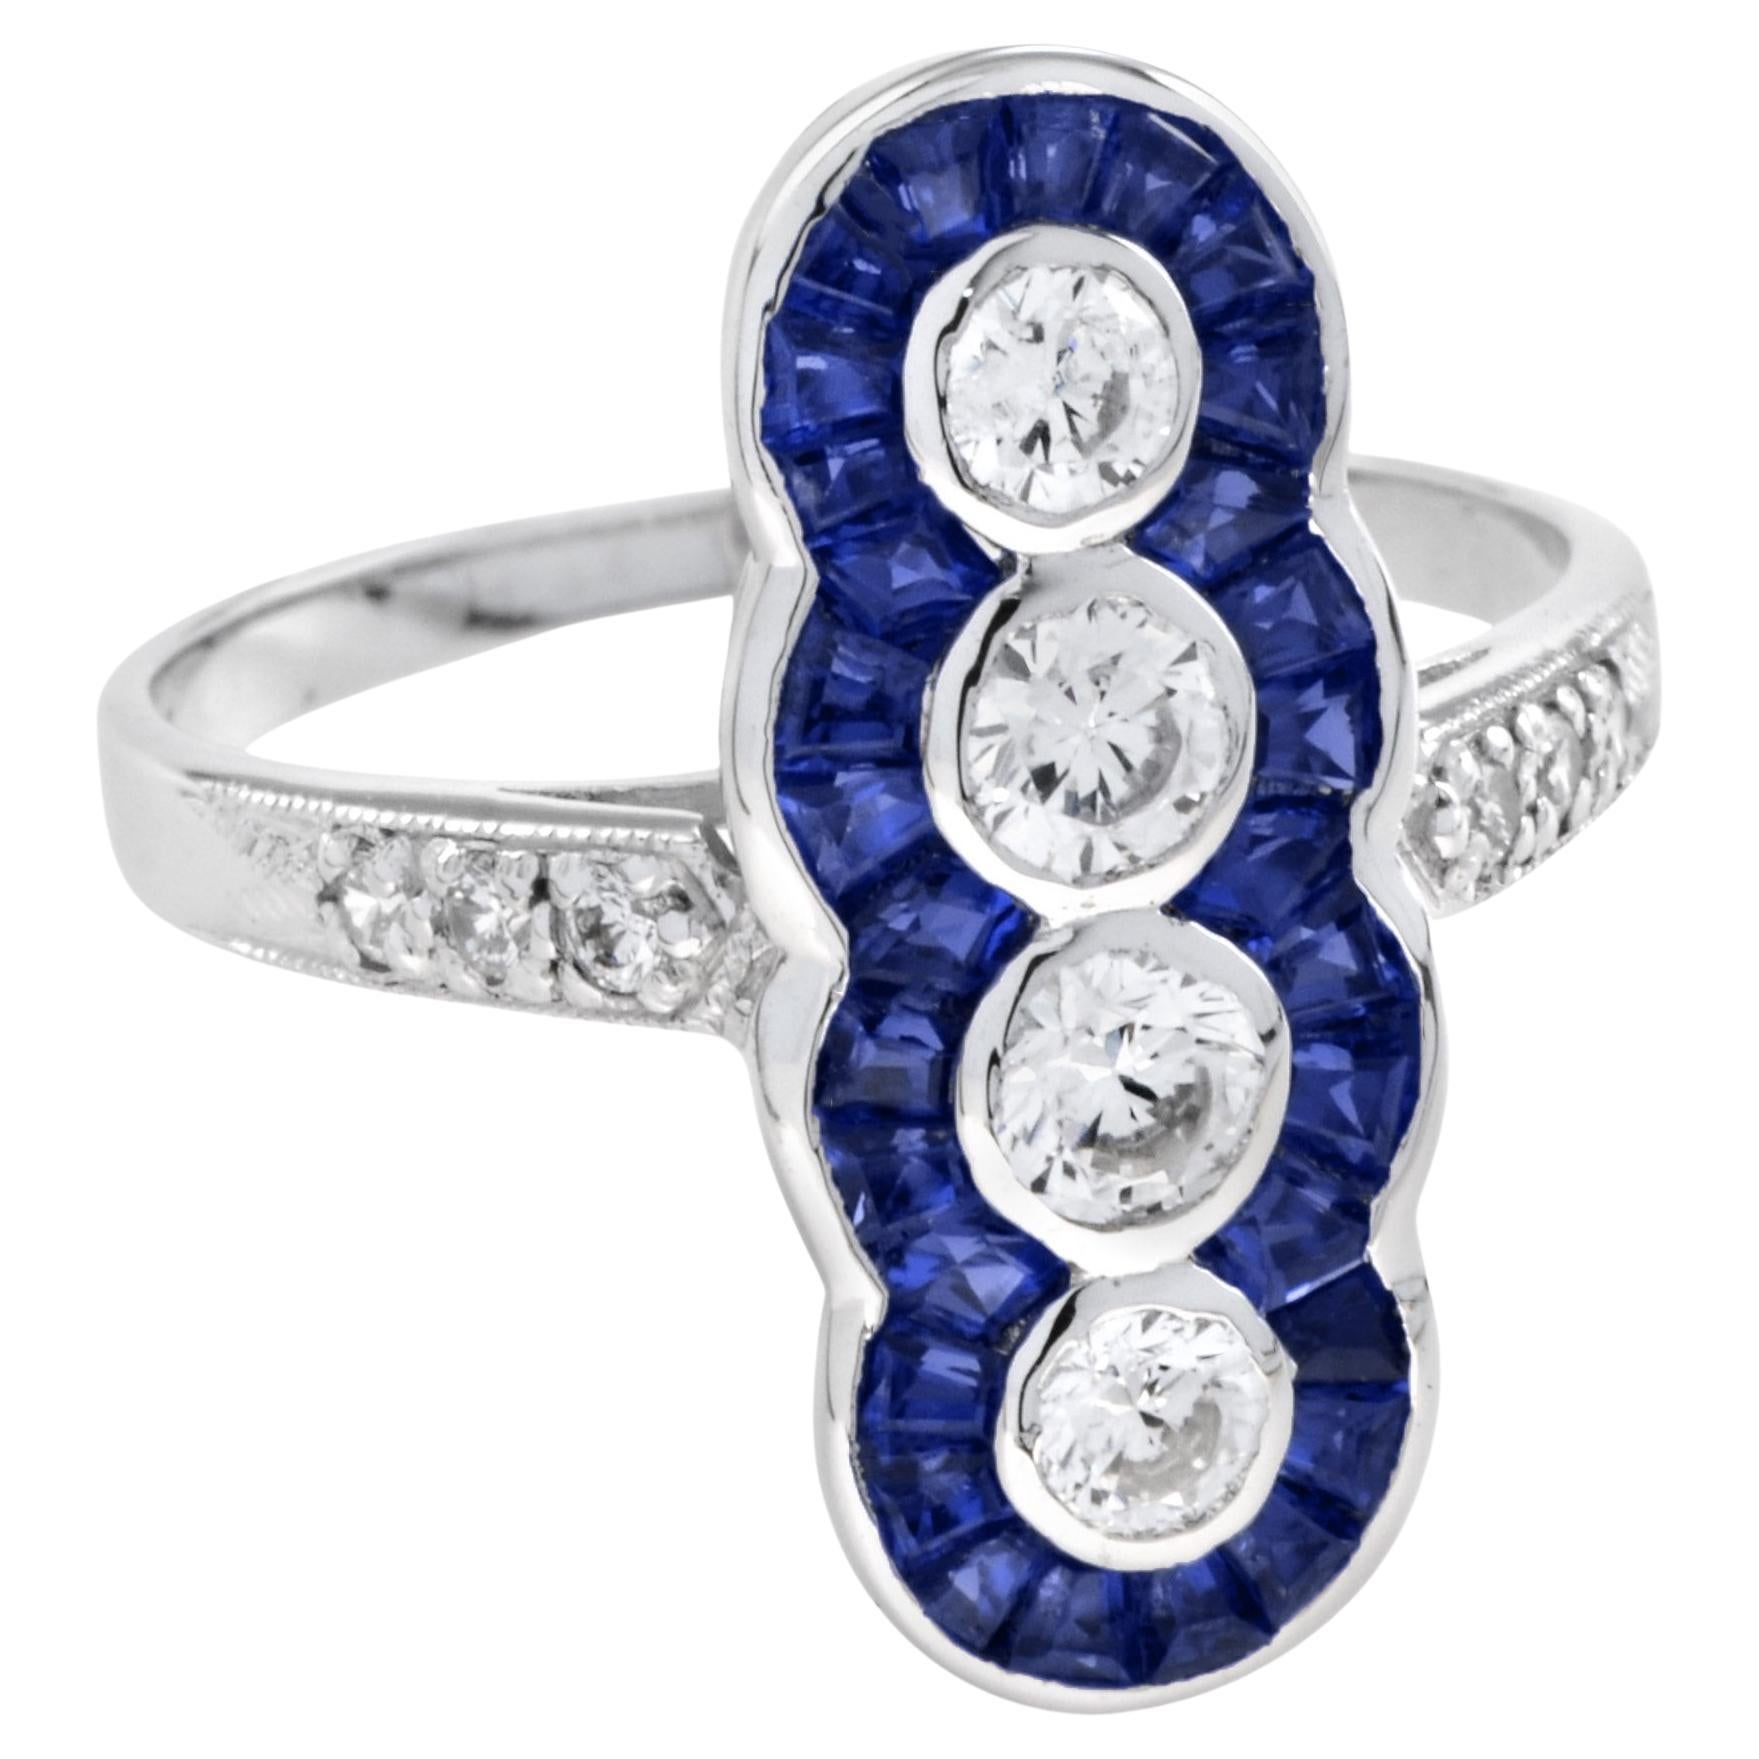 For Sale:  Four Stone Diamond and Sapphire Cocktail Ring in 14K White Gold